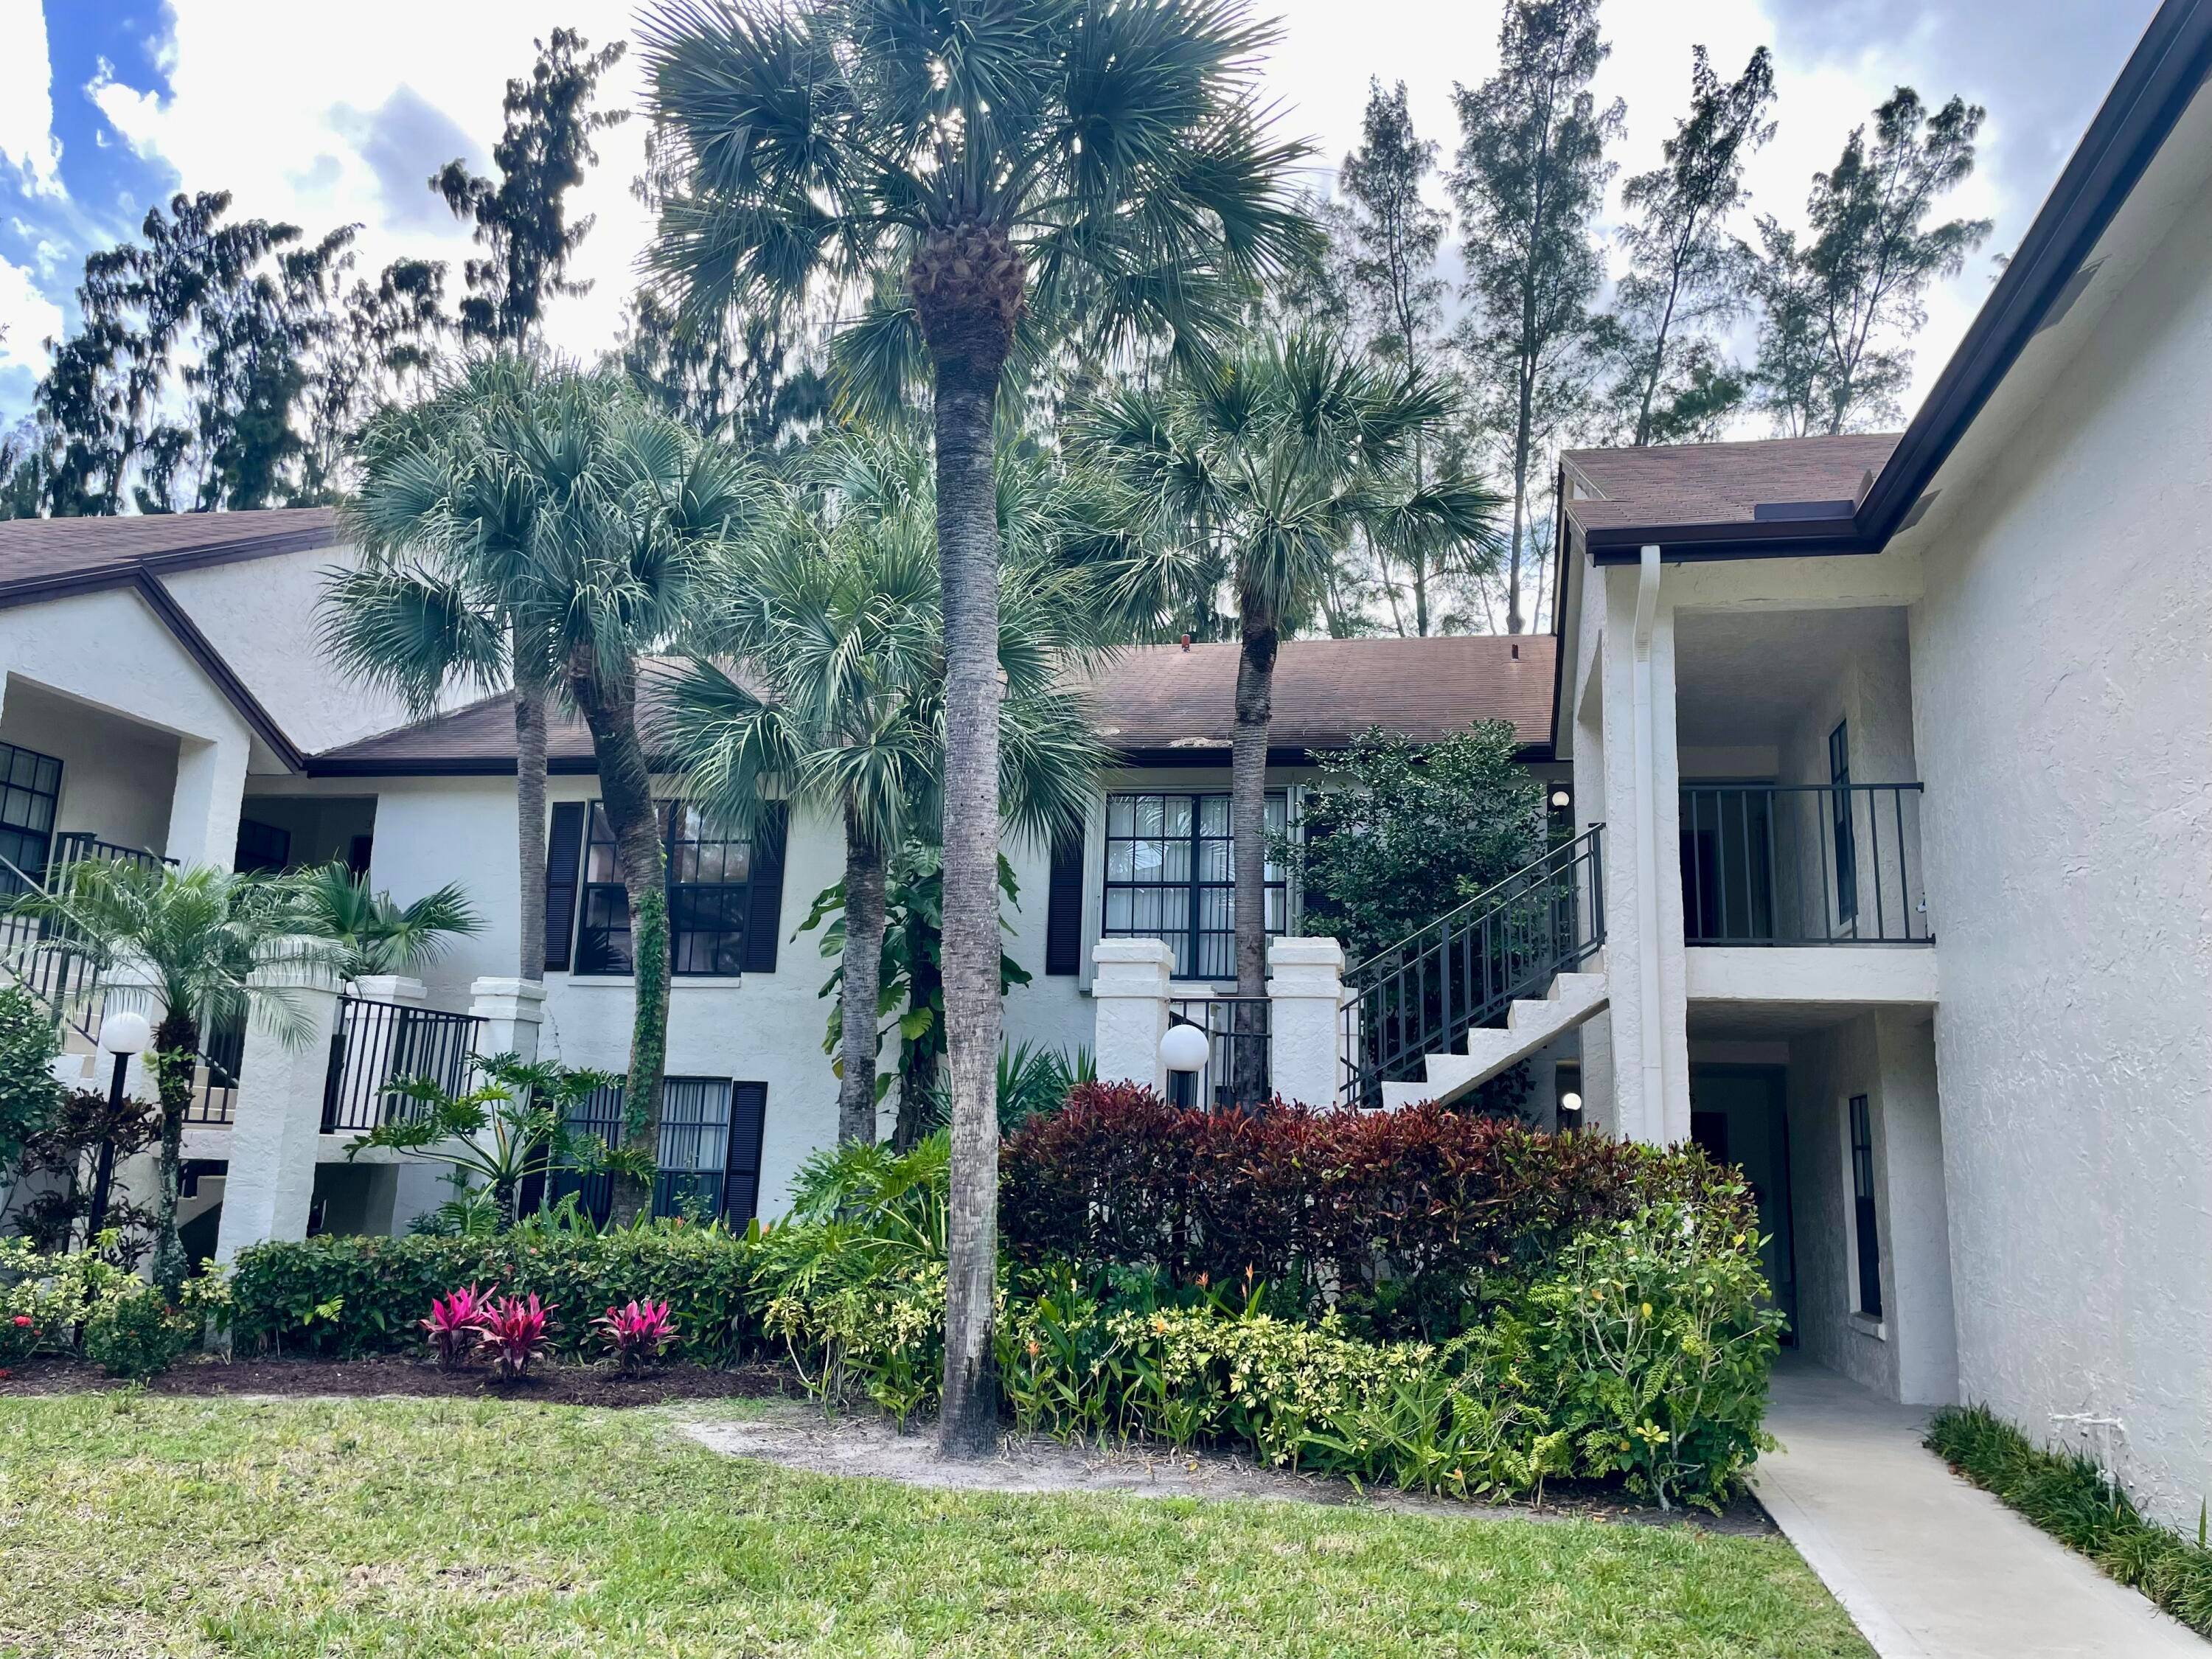 Calling all investors ! Located within the active 55 Community of Park Pointe, this condo is the largest, most spacious, model in the community, the Aruba model.